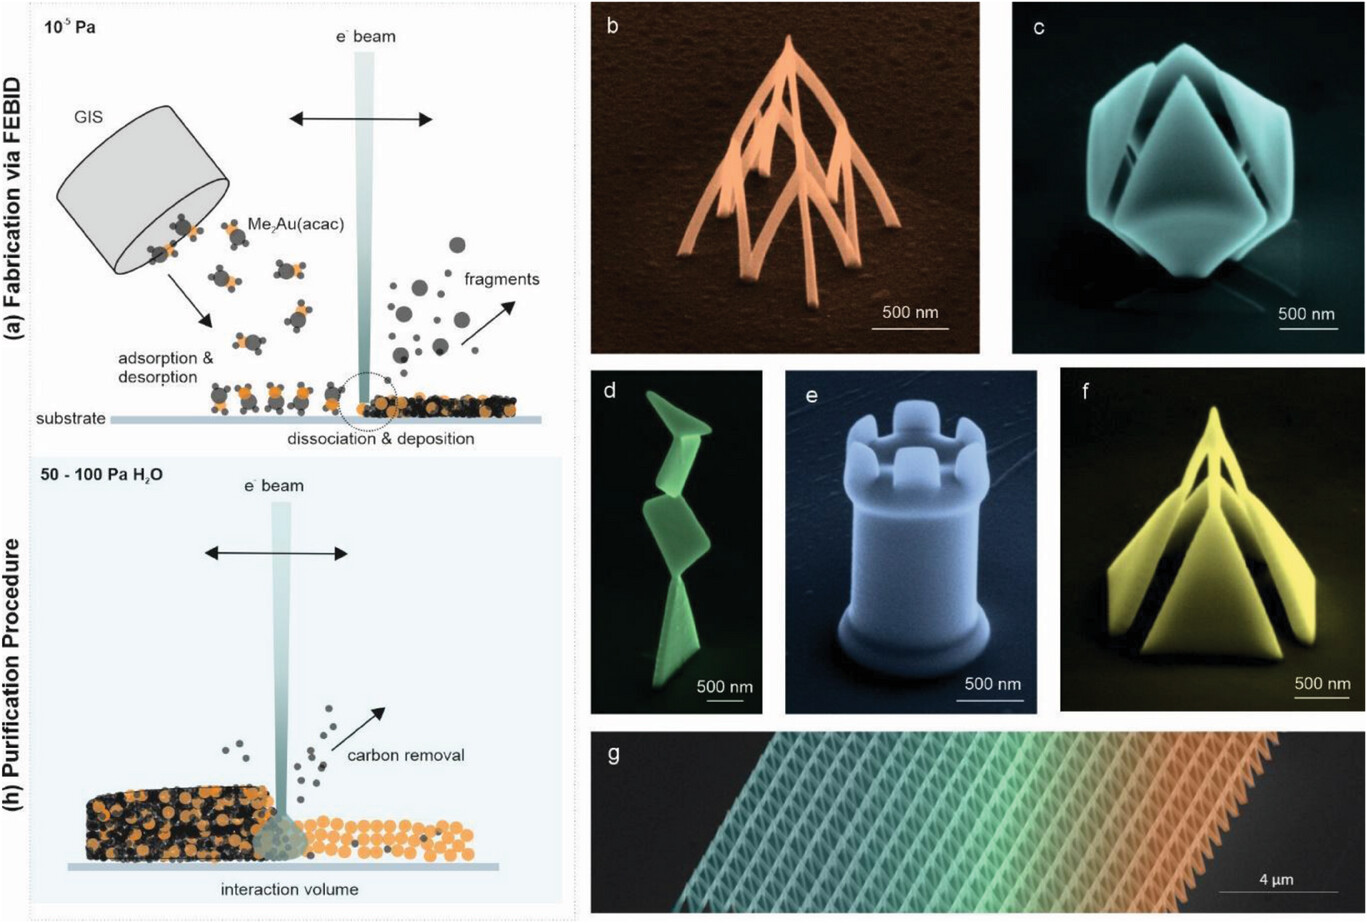 Fabrication, purification, and 3D possibilities of plasmonic nanostructures